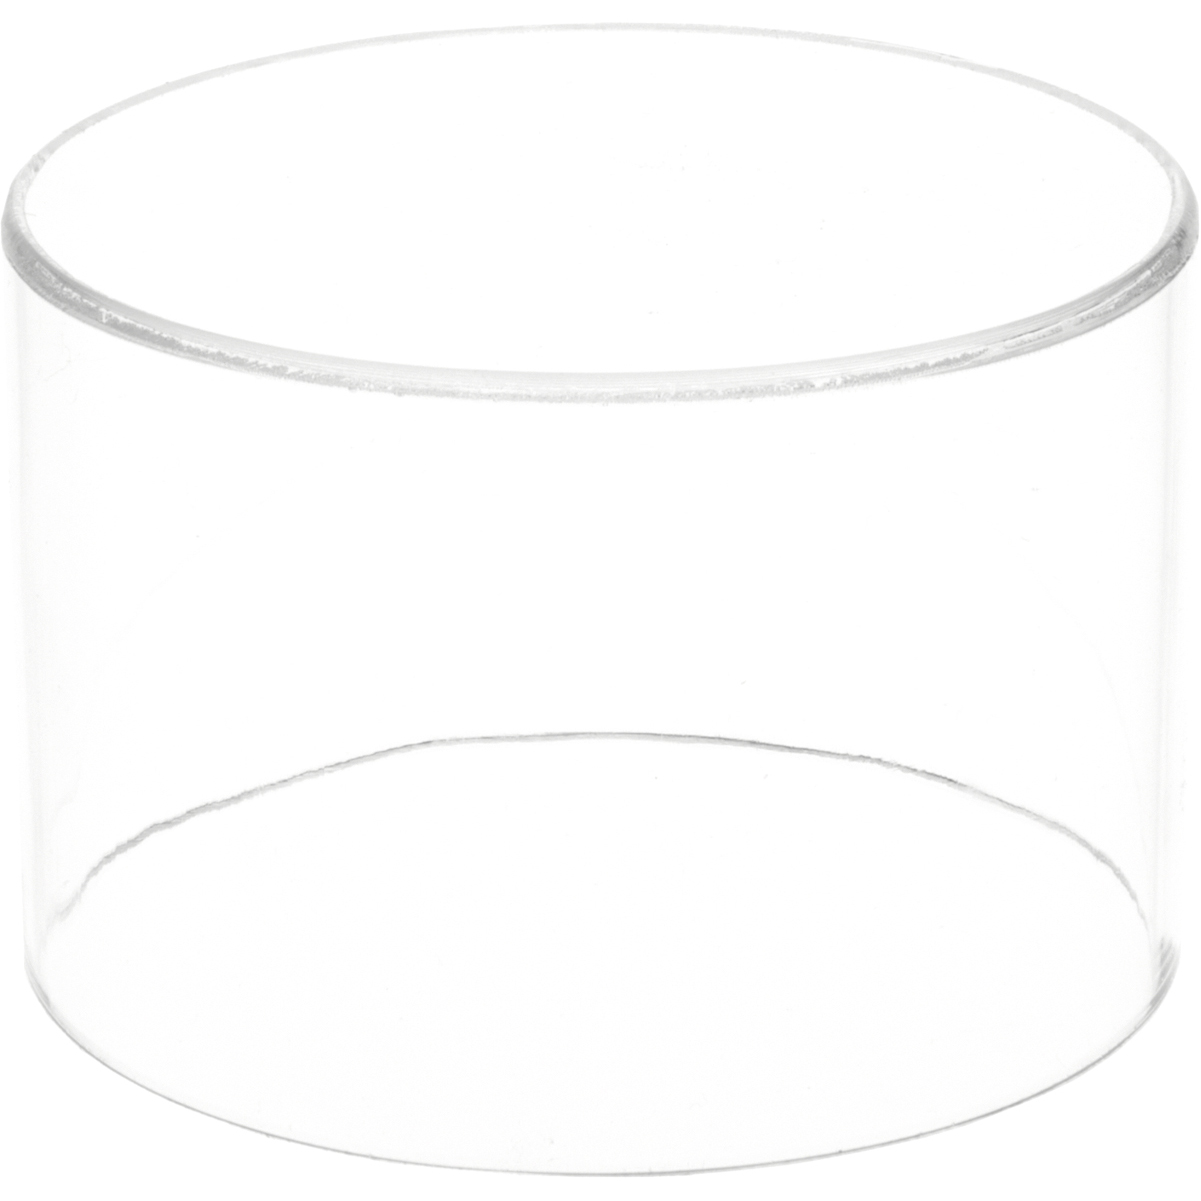 6" H x 4" W x 4" D 1/8" thick Plymor Clear Acrylic Vertical Square Riser 